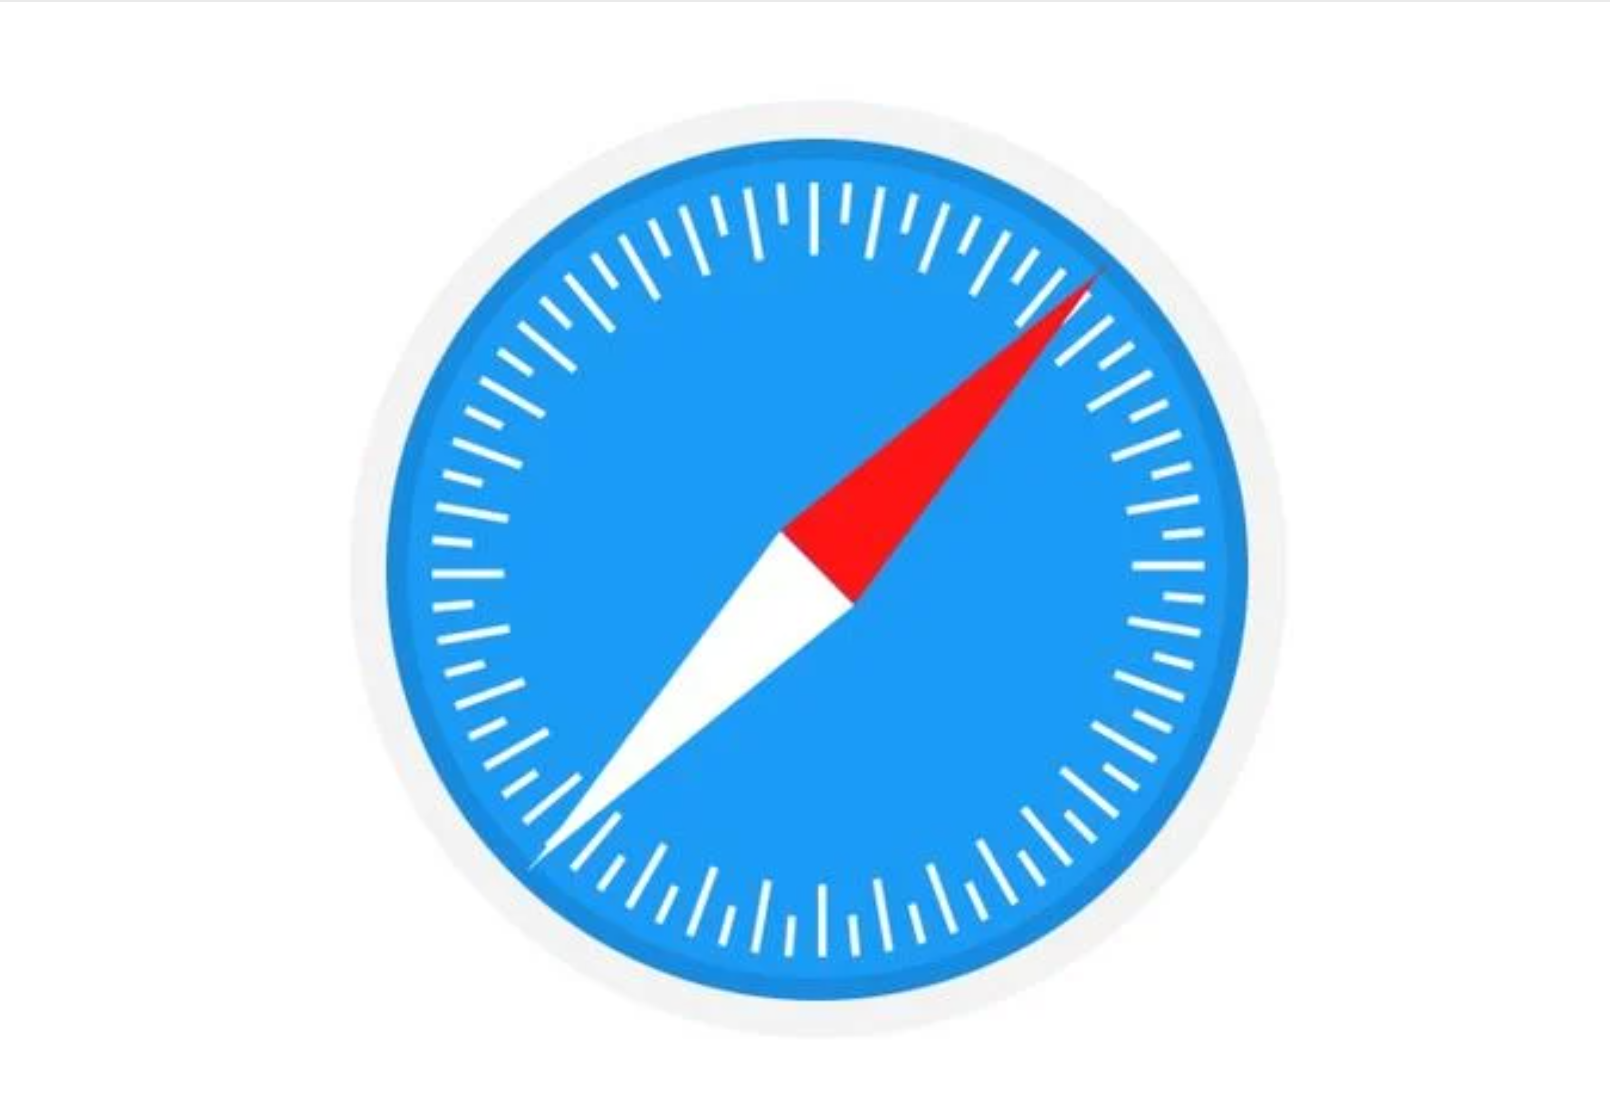 SPEEDING UP AND RESETTING THE SAFARI BROWSER